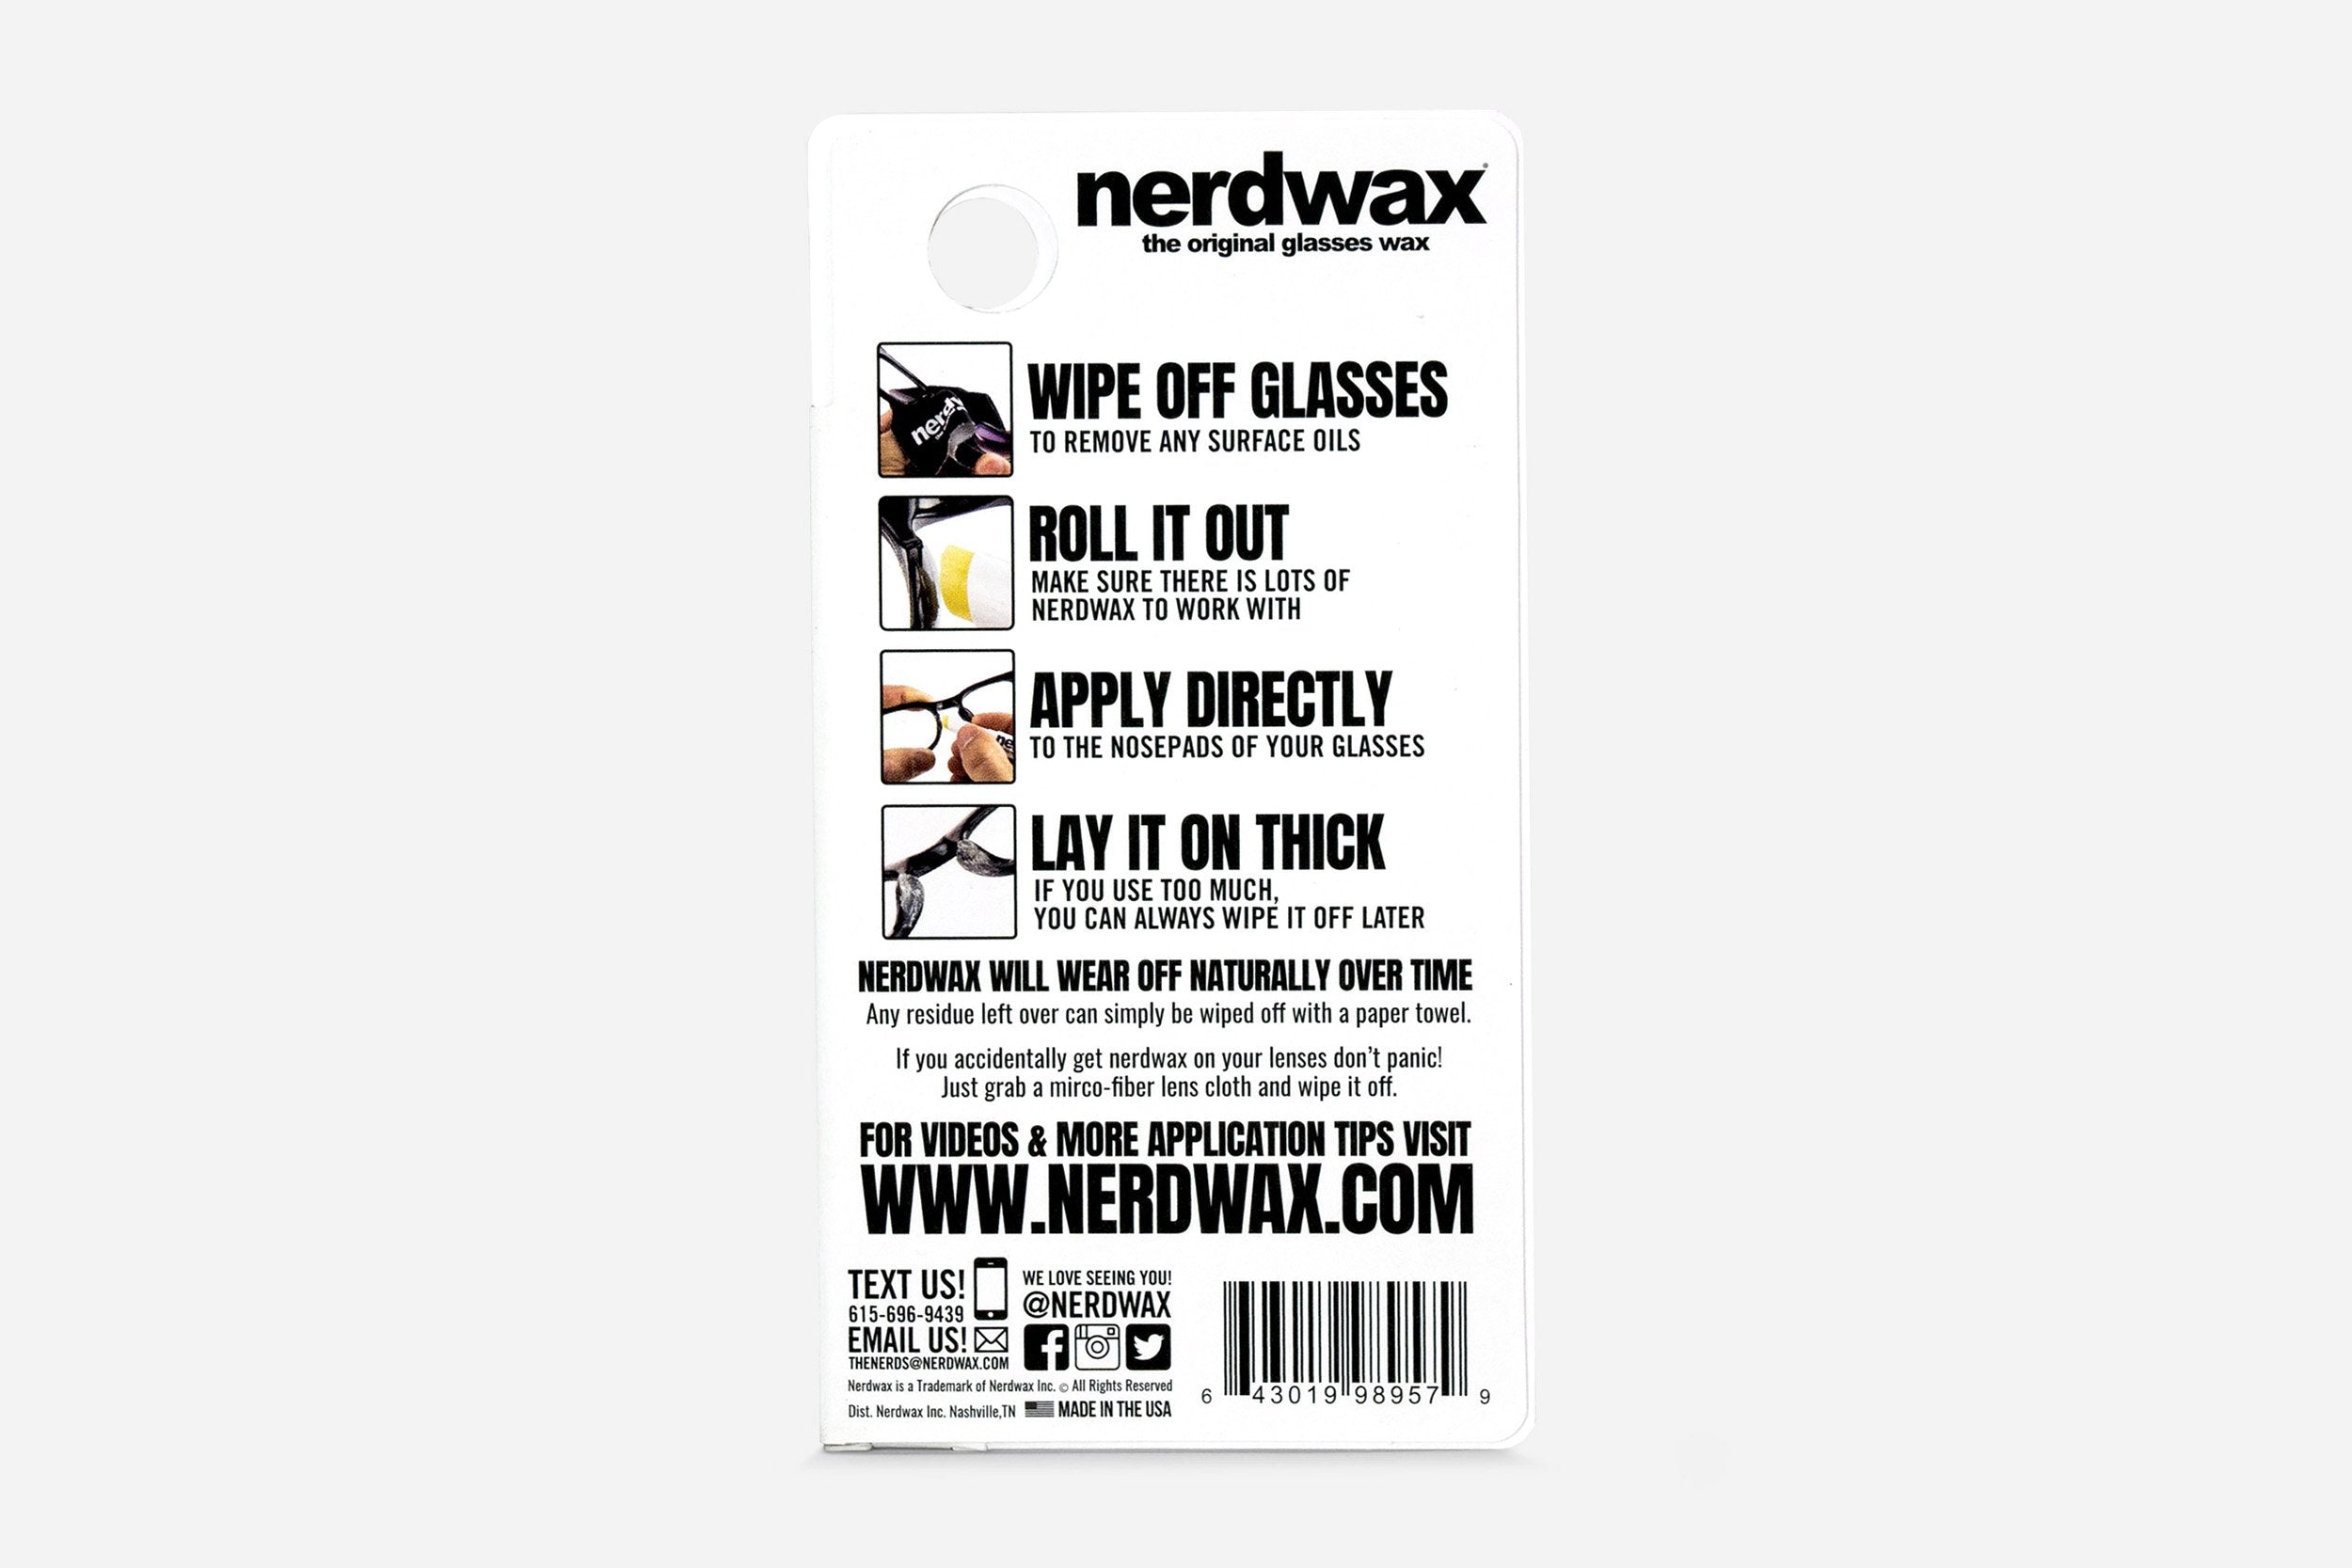 Back of Nerdwax product - Wipe off glasses, roll it out, apply directly, lay it on thick